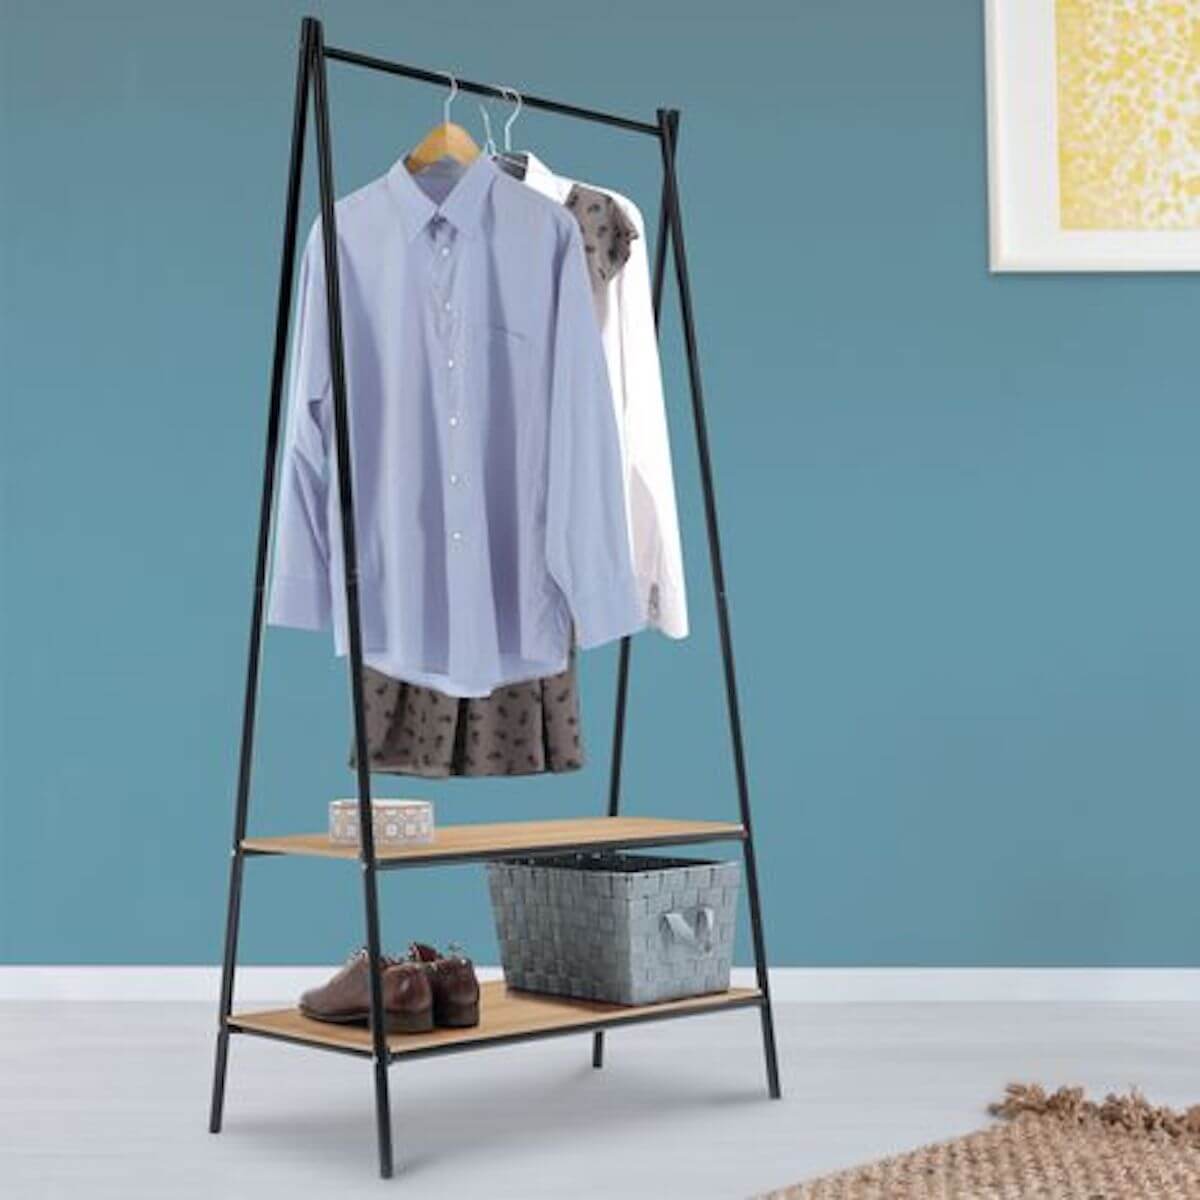 A wardrobe for a small cloakroom area (1)